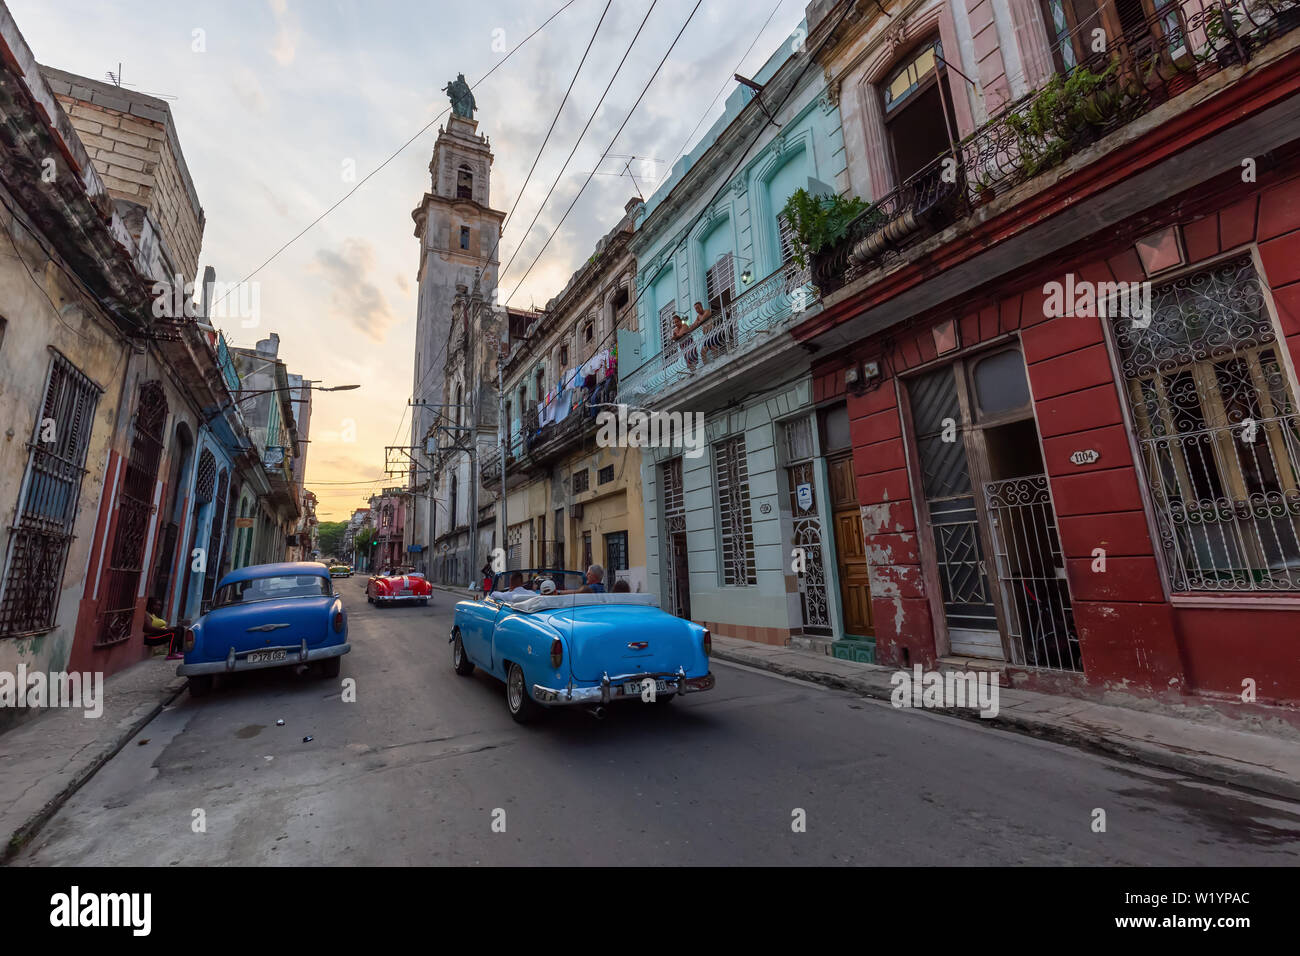 Havana, Cuba - May 17, 2019: Classic Old American Car in the streets of the Old Havana City during a vibrant sunset. Stock Photo